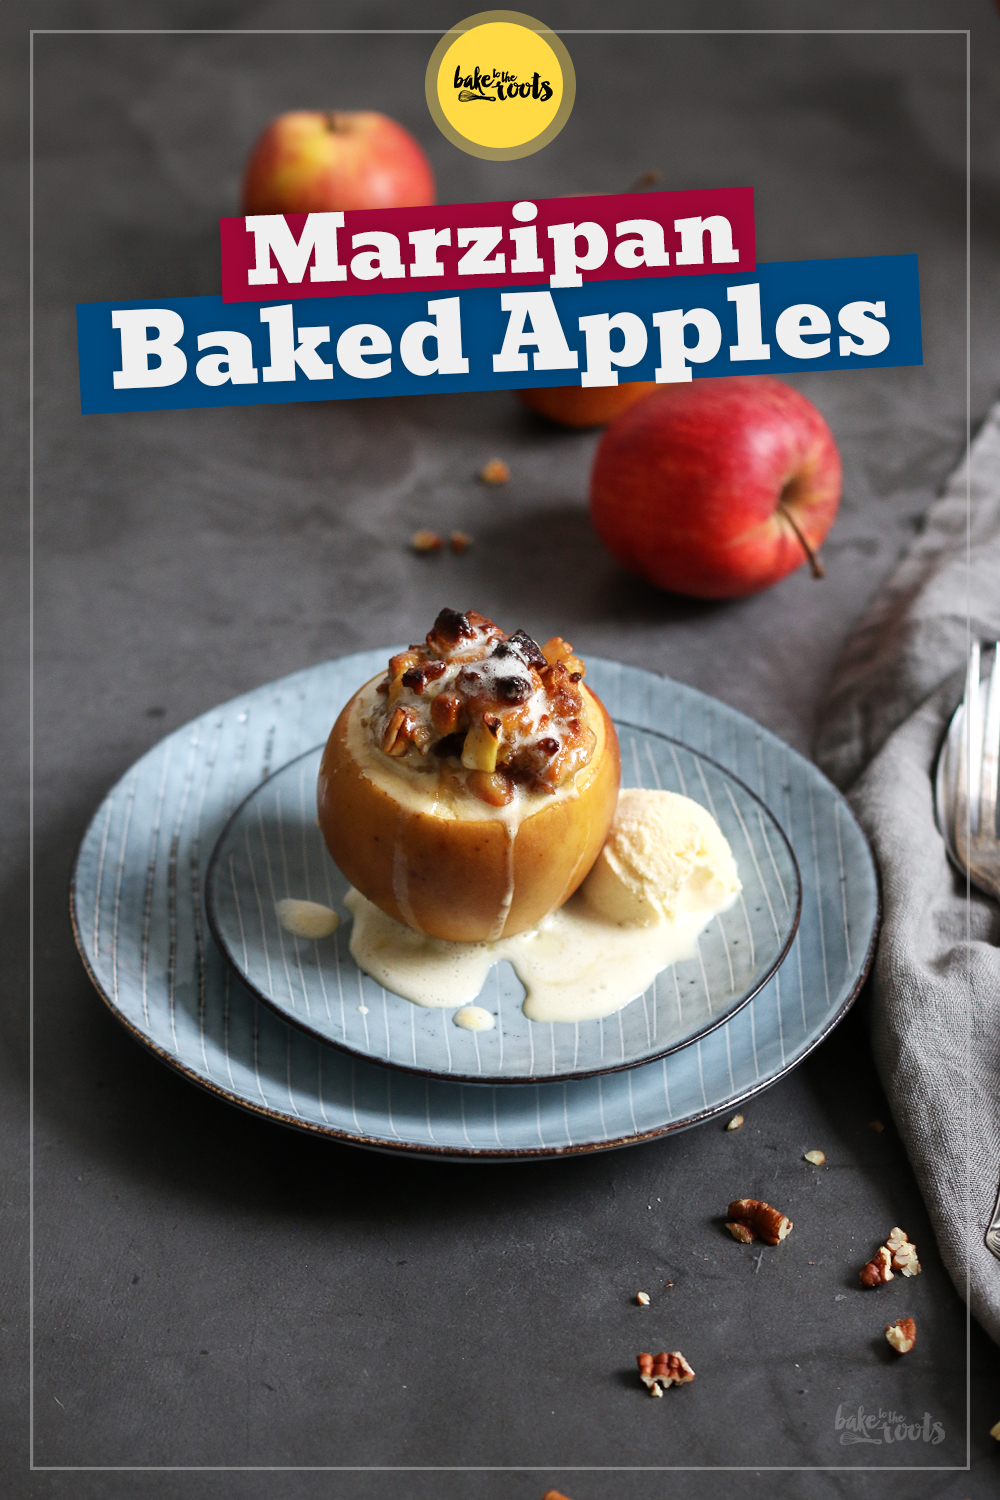 Baked Apples with Marzipan & Pecans | Bake to the roots